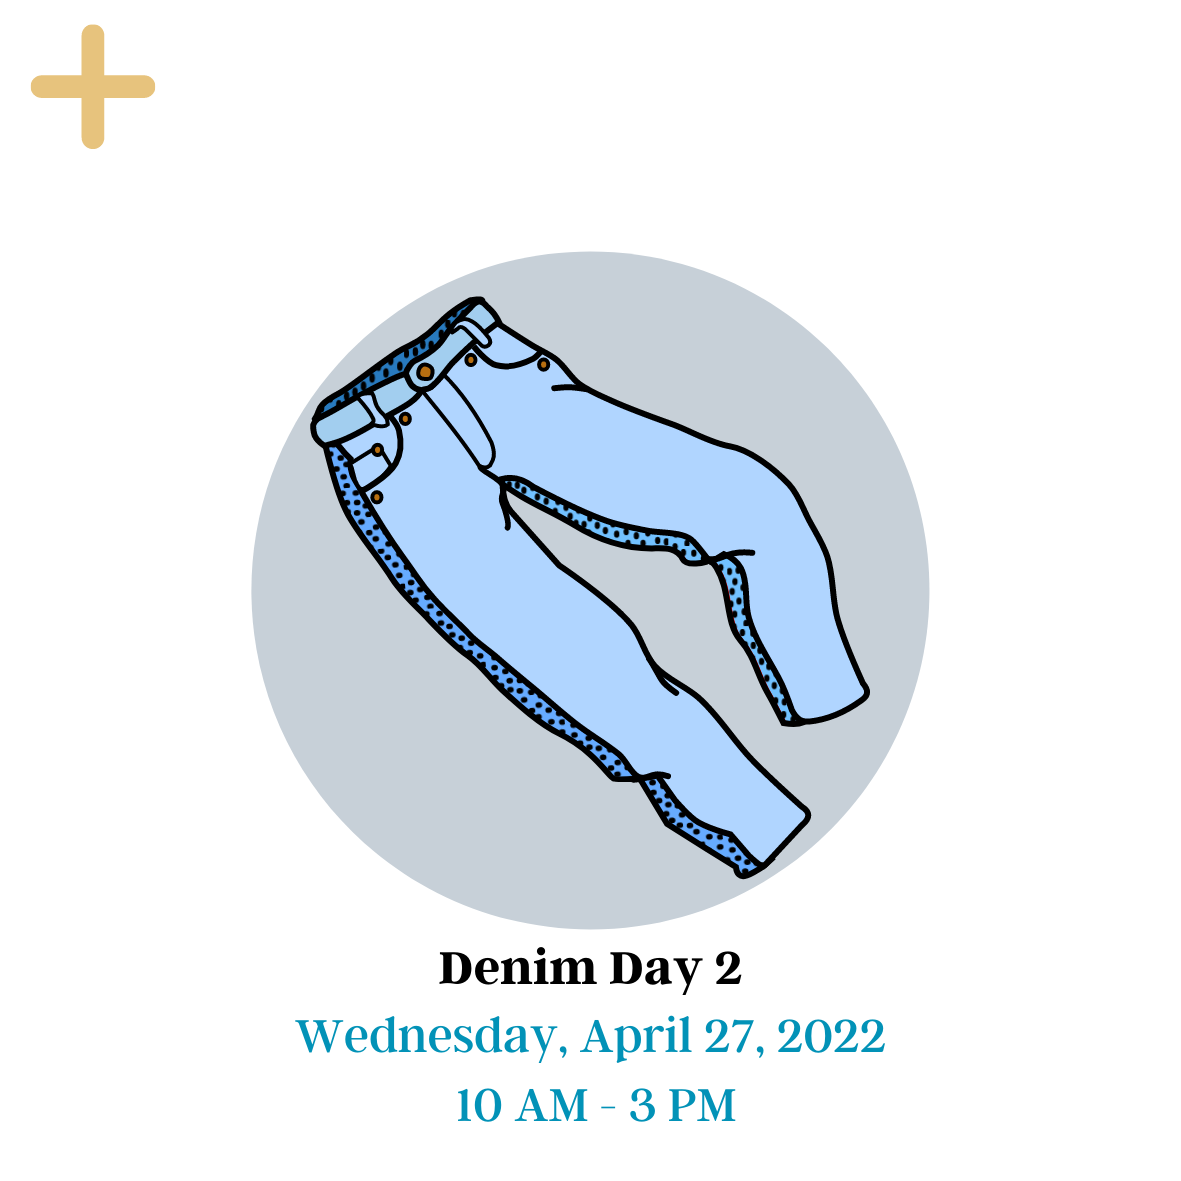 Denim day 2 cover page with an image of blue denim jeans within a gray circle. The yellow button on the top can be clicked and will provide more information. The picture has date at the bottom: Wednesday, April 27, 2022